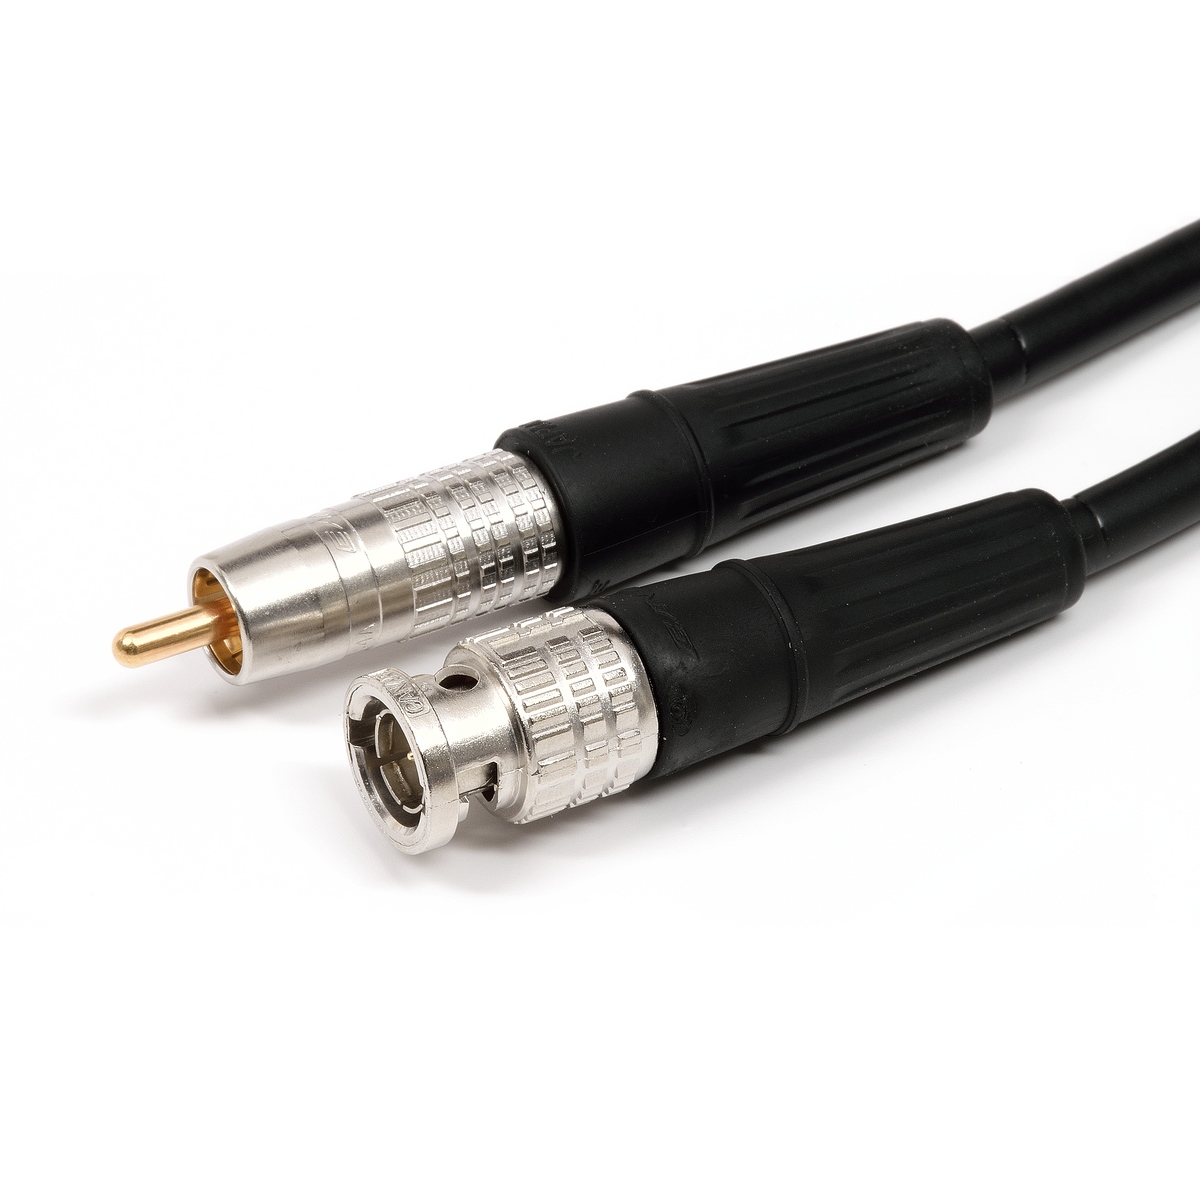 Benchmark BNC to RCA Coaxial Cable for Digital Audio or Analog